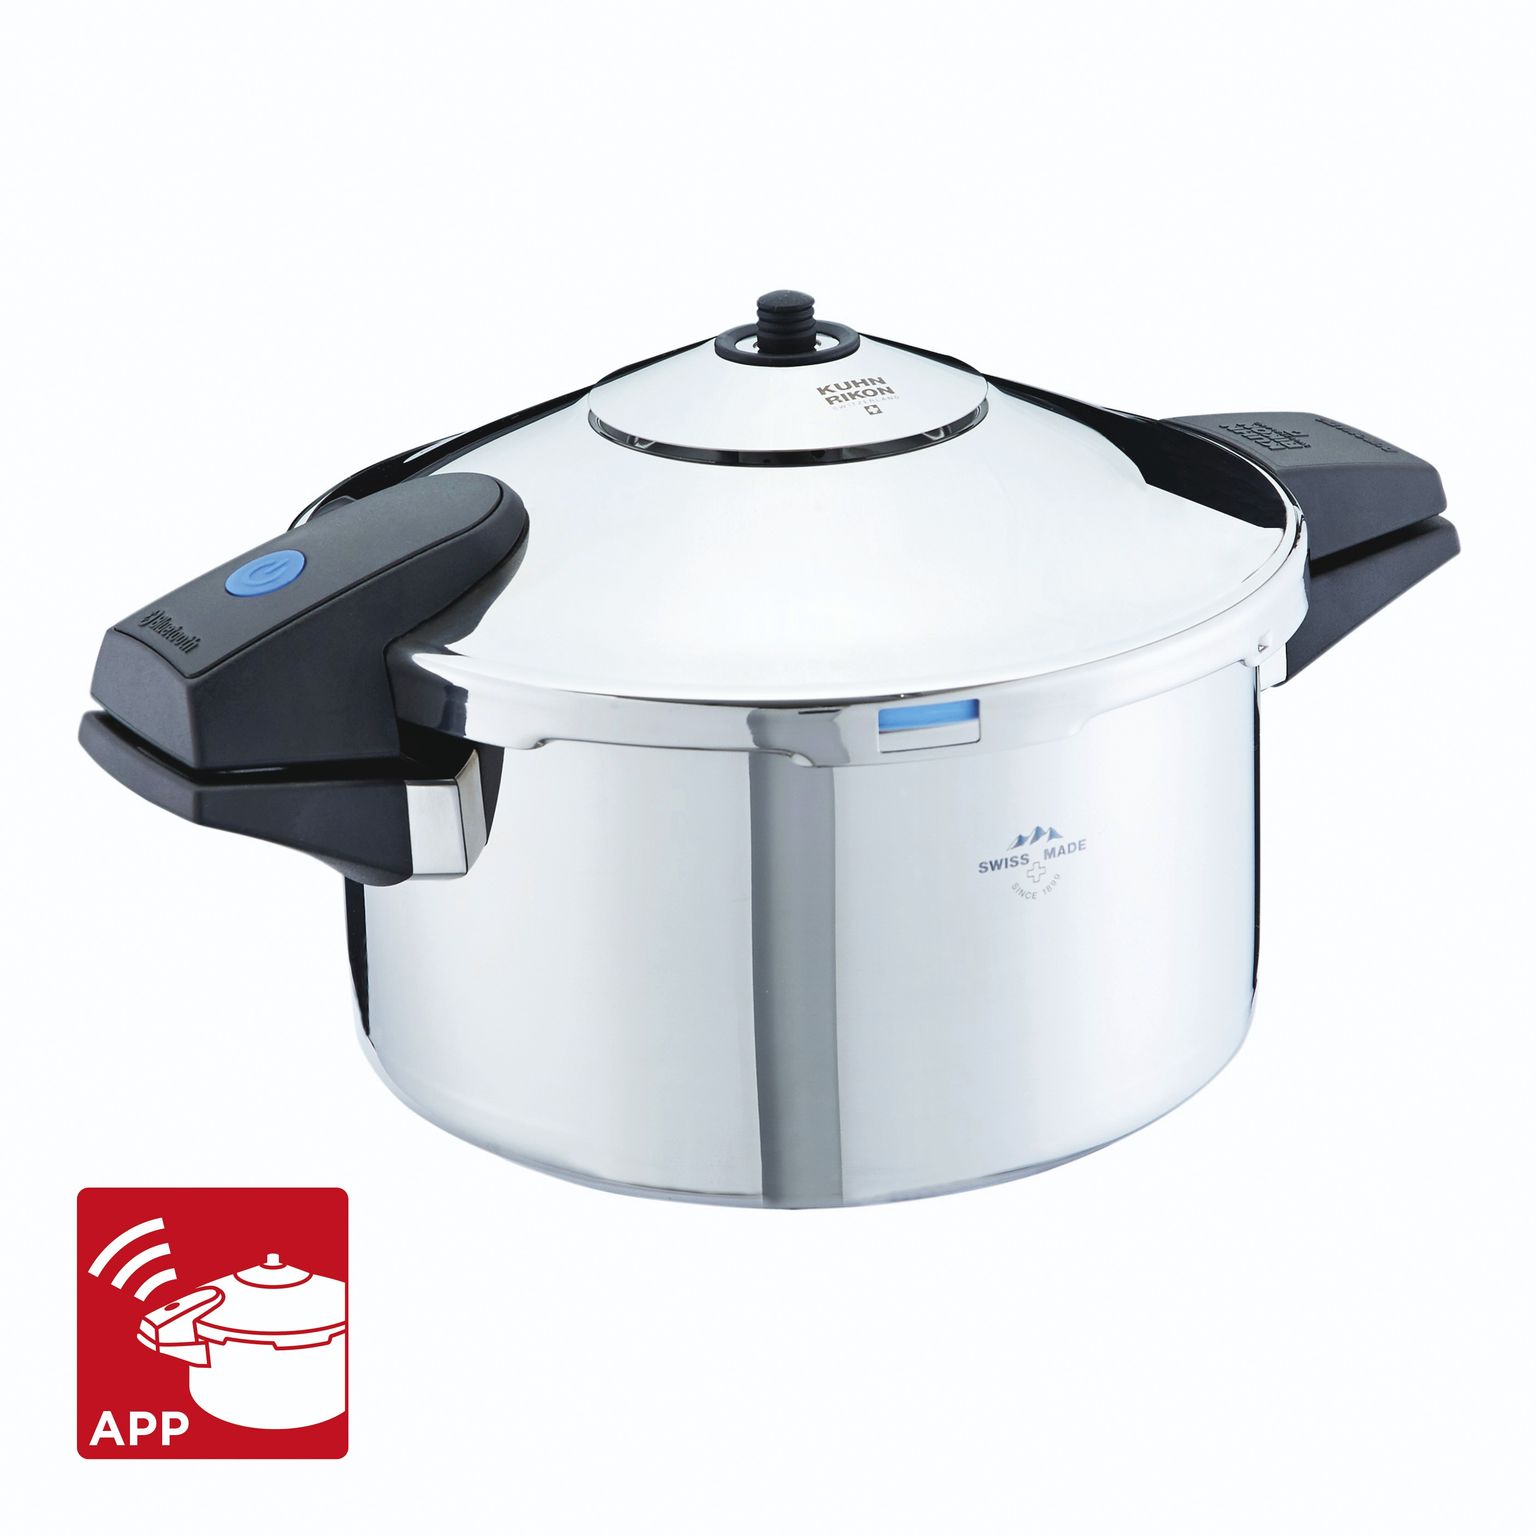 Kuhn Rikon Duromatic Comfort Stainless Steel Pressure Cooker with Side Grips 22 cm 4 Litre 